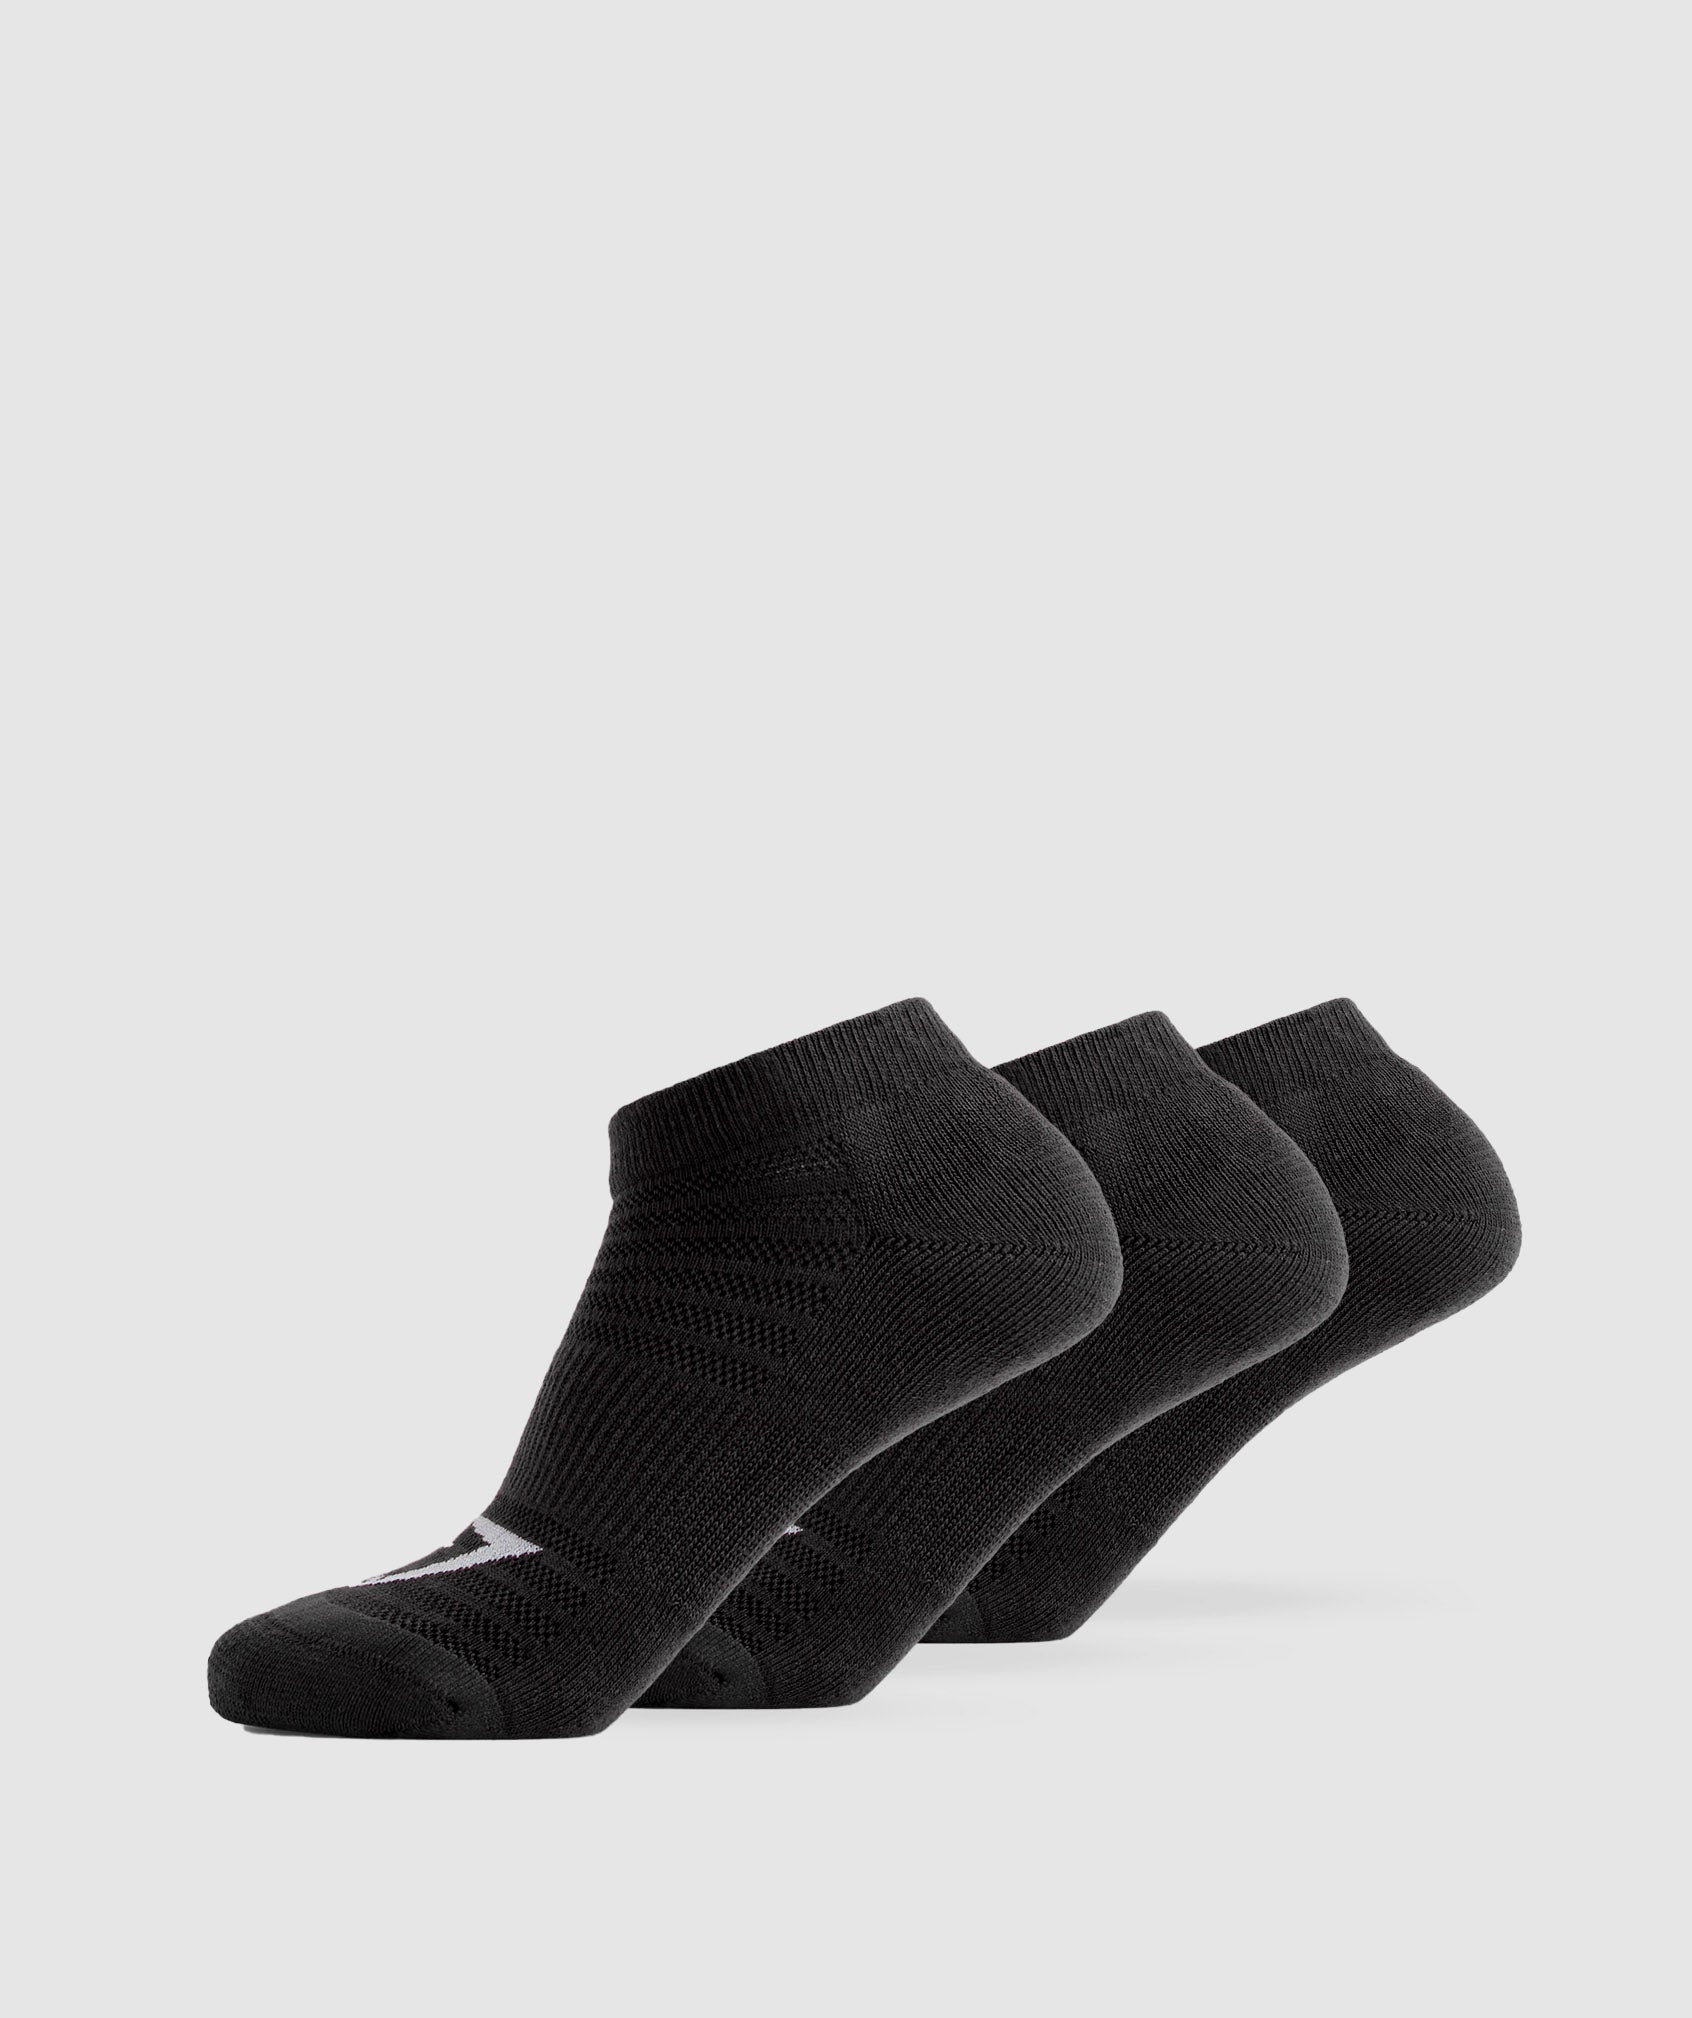 Ankle Socks 3pk in Black is out of stock